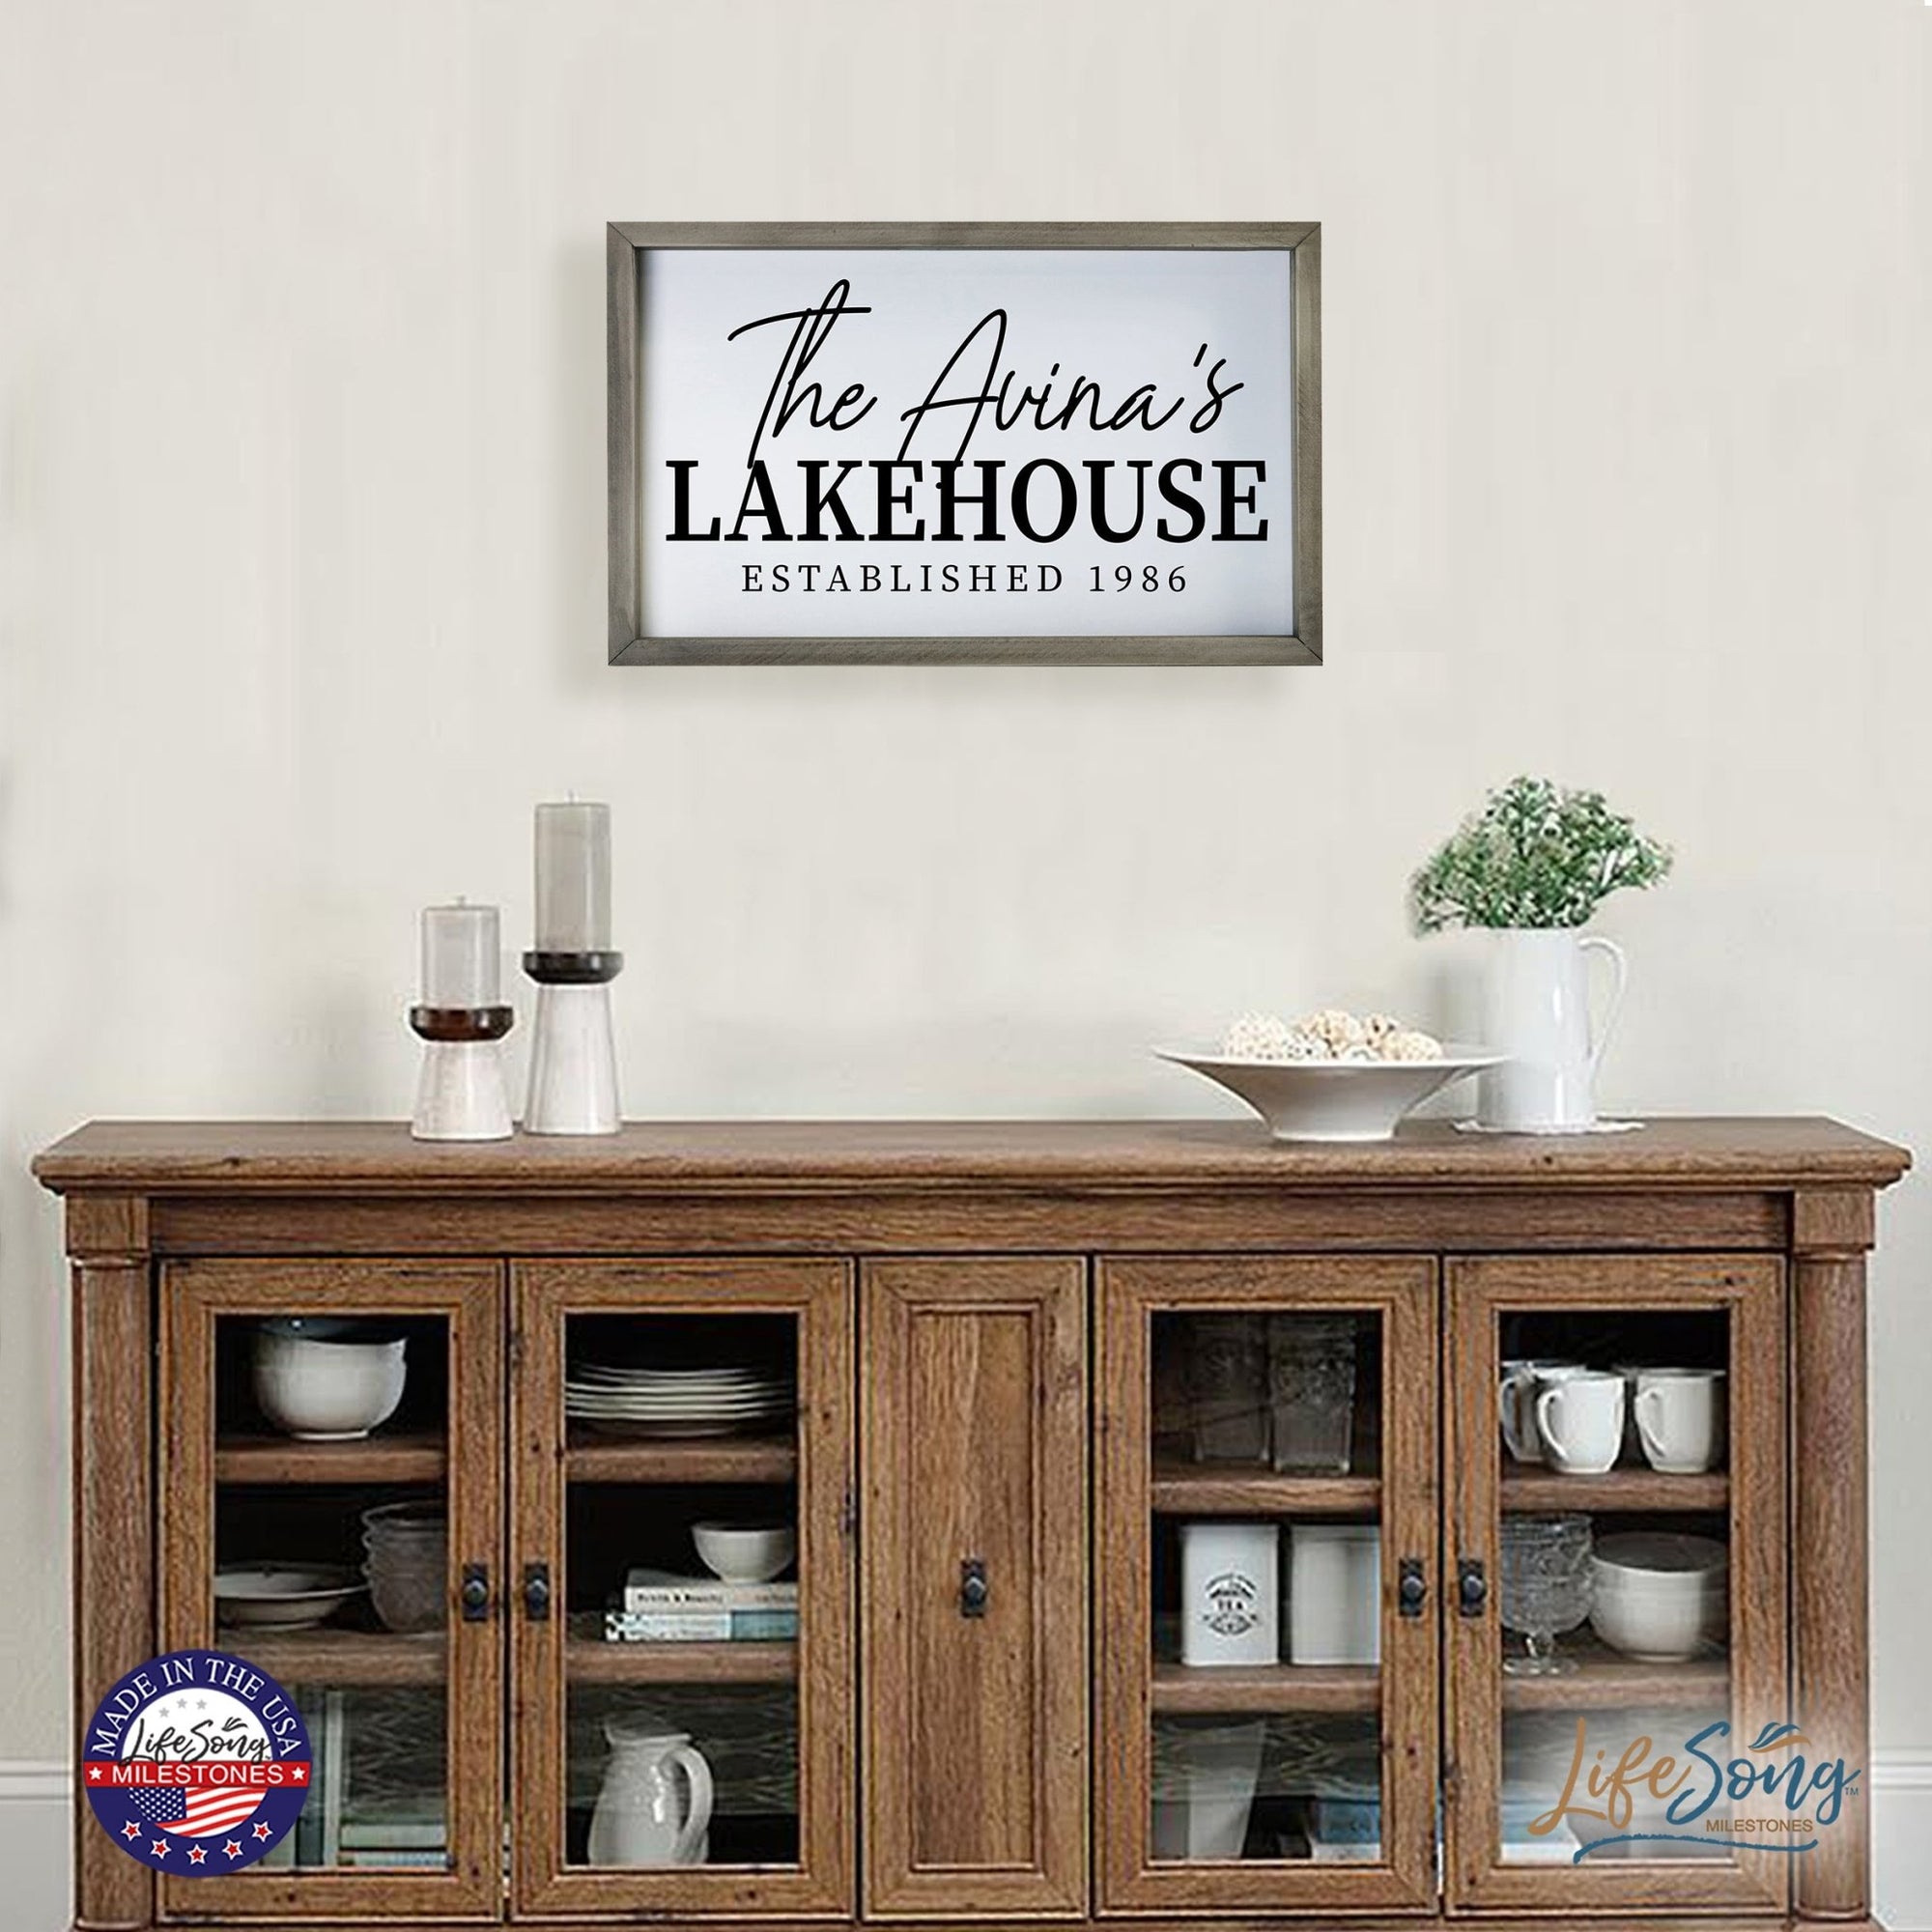 Inspirational Personalized Framed Shadow Box 12x18 - Lake House (Script) - LifeSong Milestones